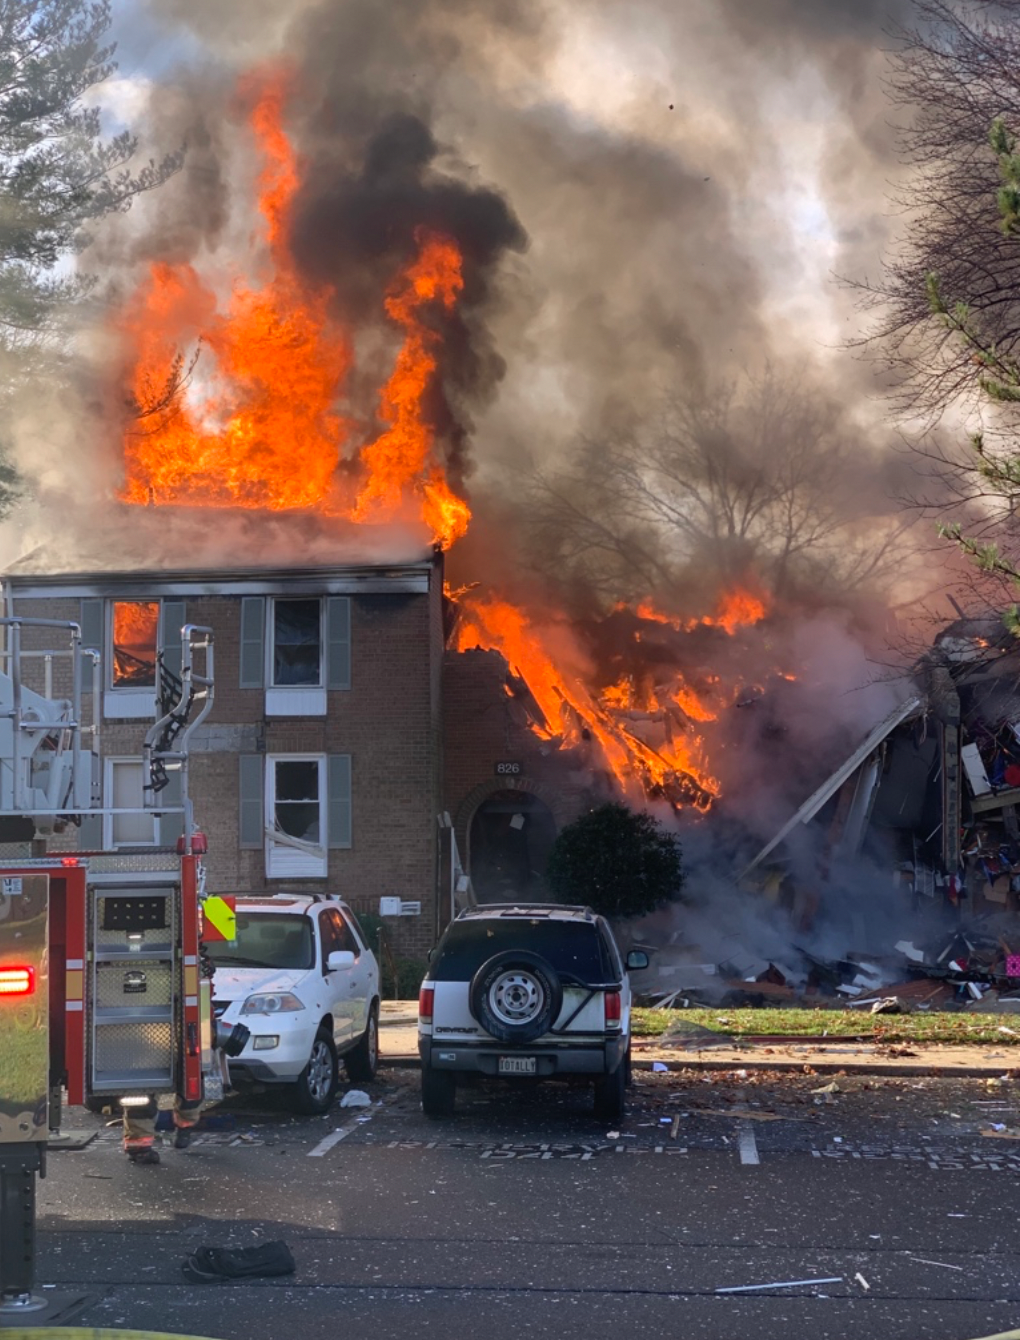 An explosion ripped through an apartment building in Gaithersburg, Maryland, on Wednesday morning